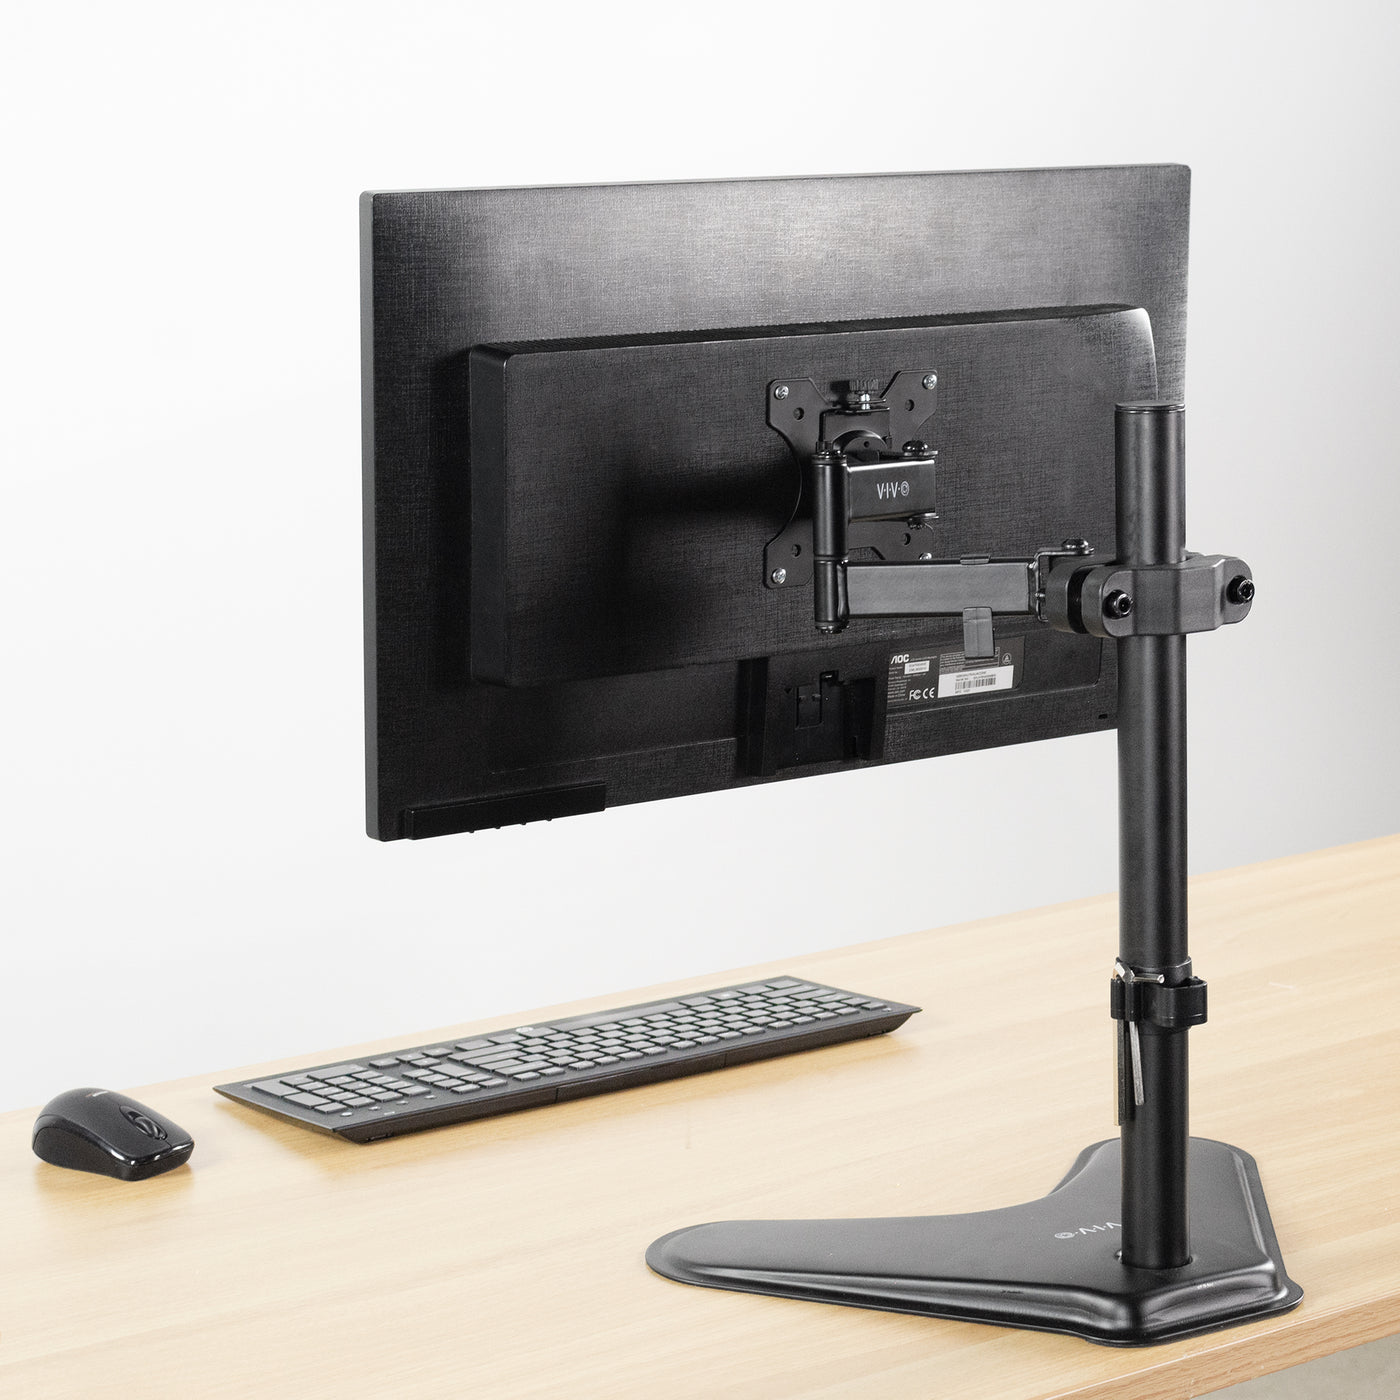 Pole Mount Monitor Arm for VESA 75x75mm and 100x100mm – VIVO - desk  solutions, screen mounting, and more